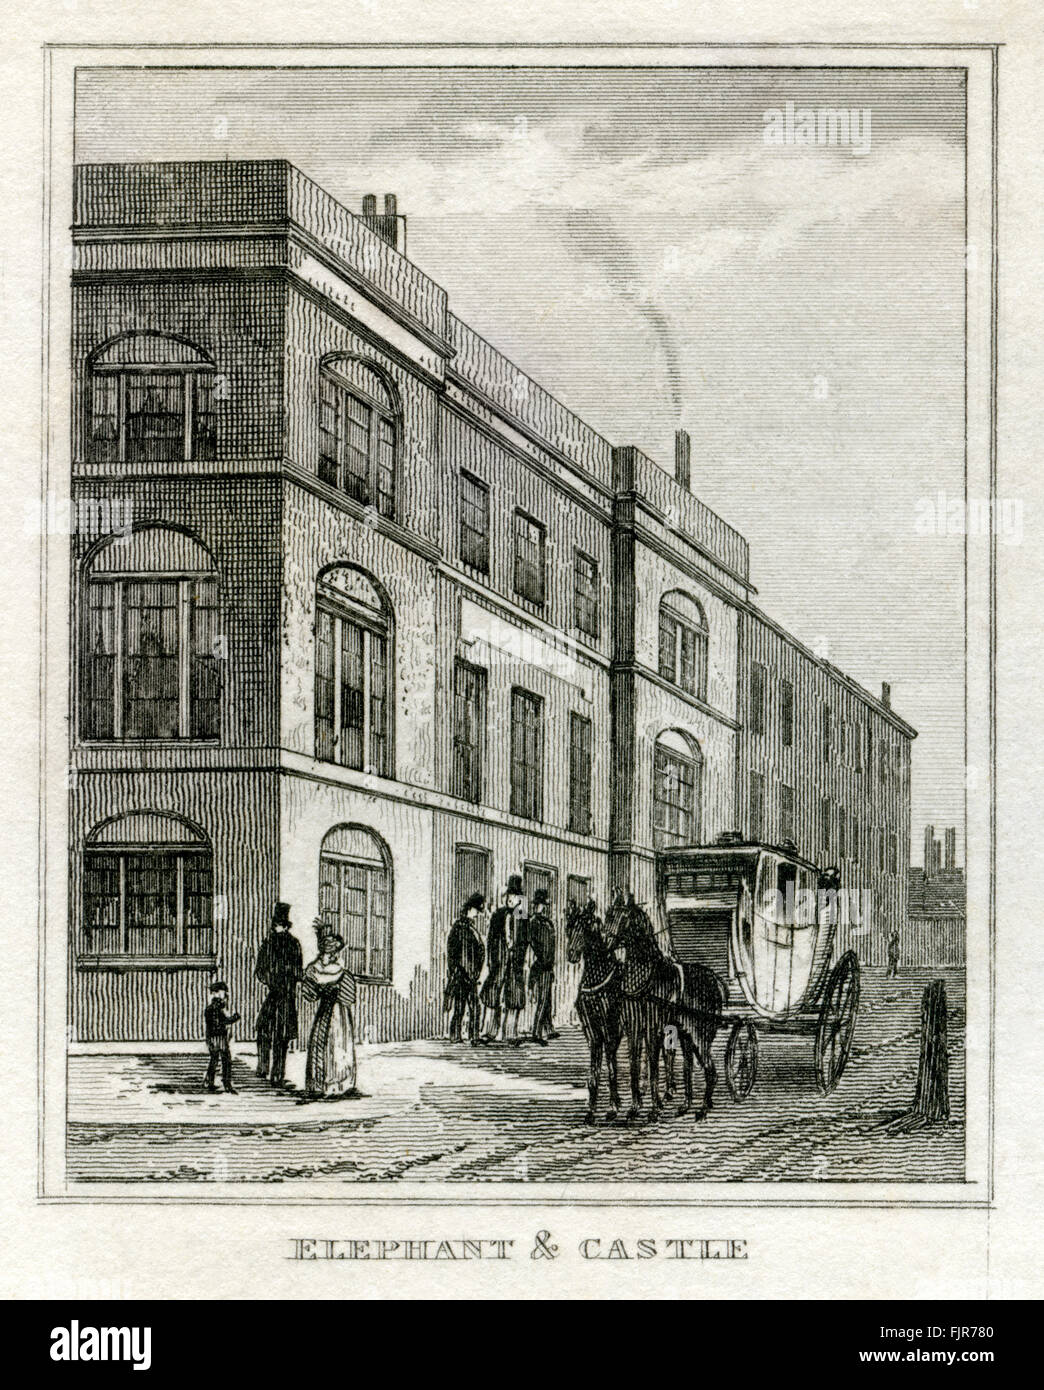 Elephant and Castle tavern, London. From 1835 print. Stock Photo